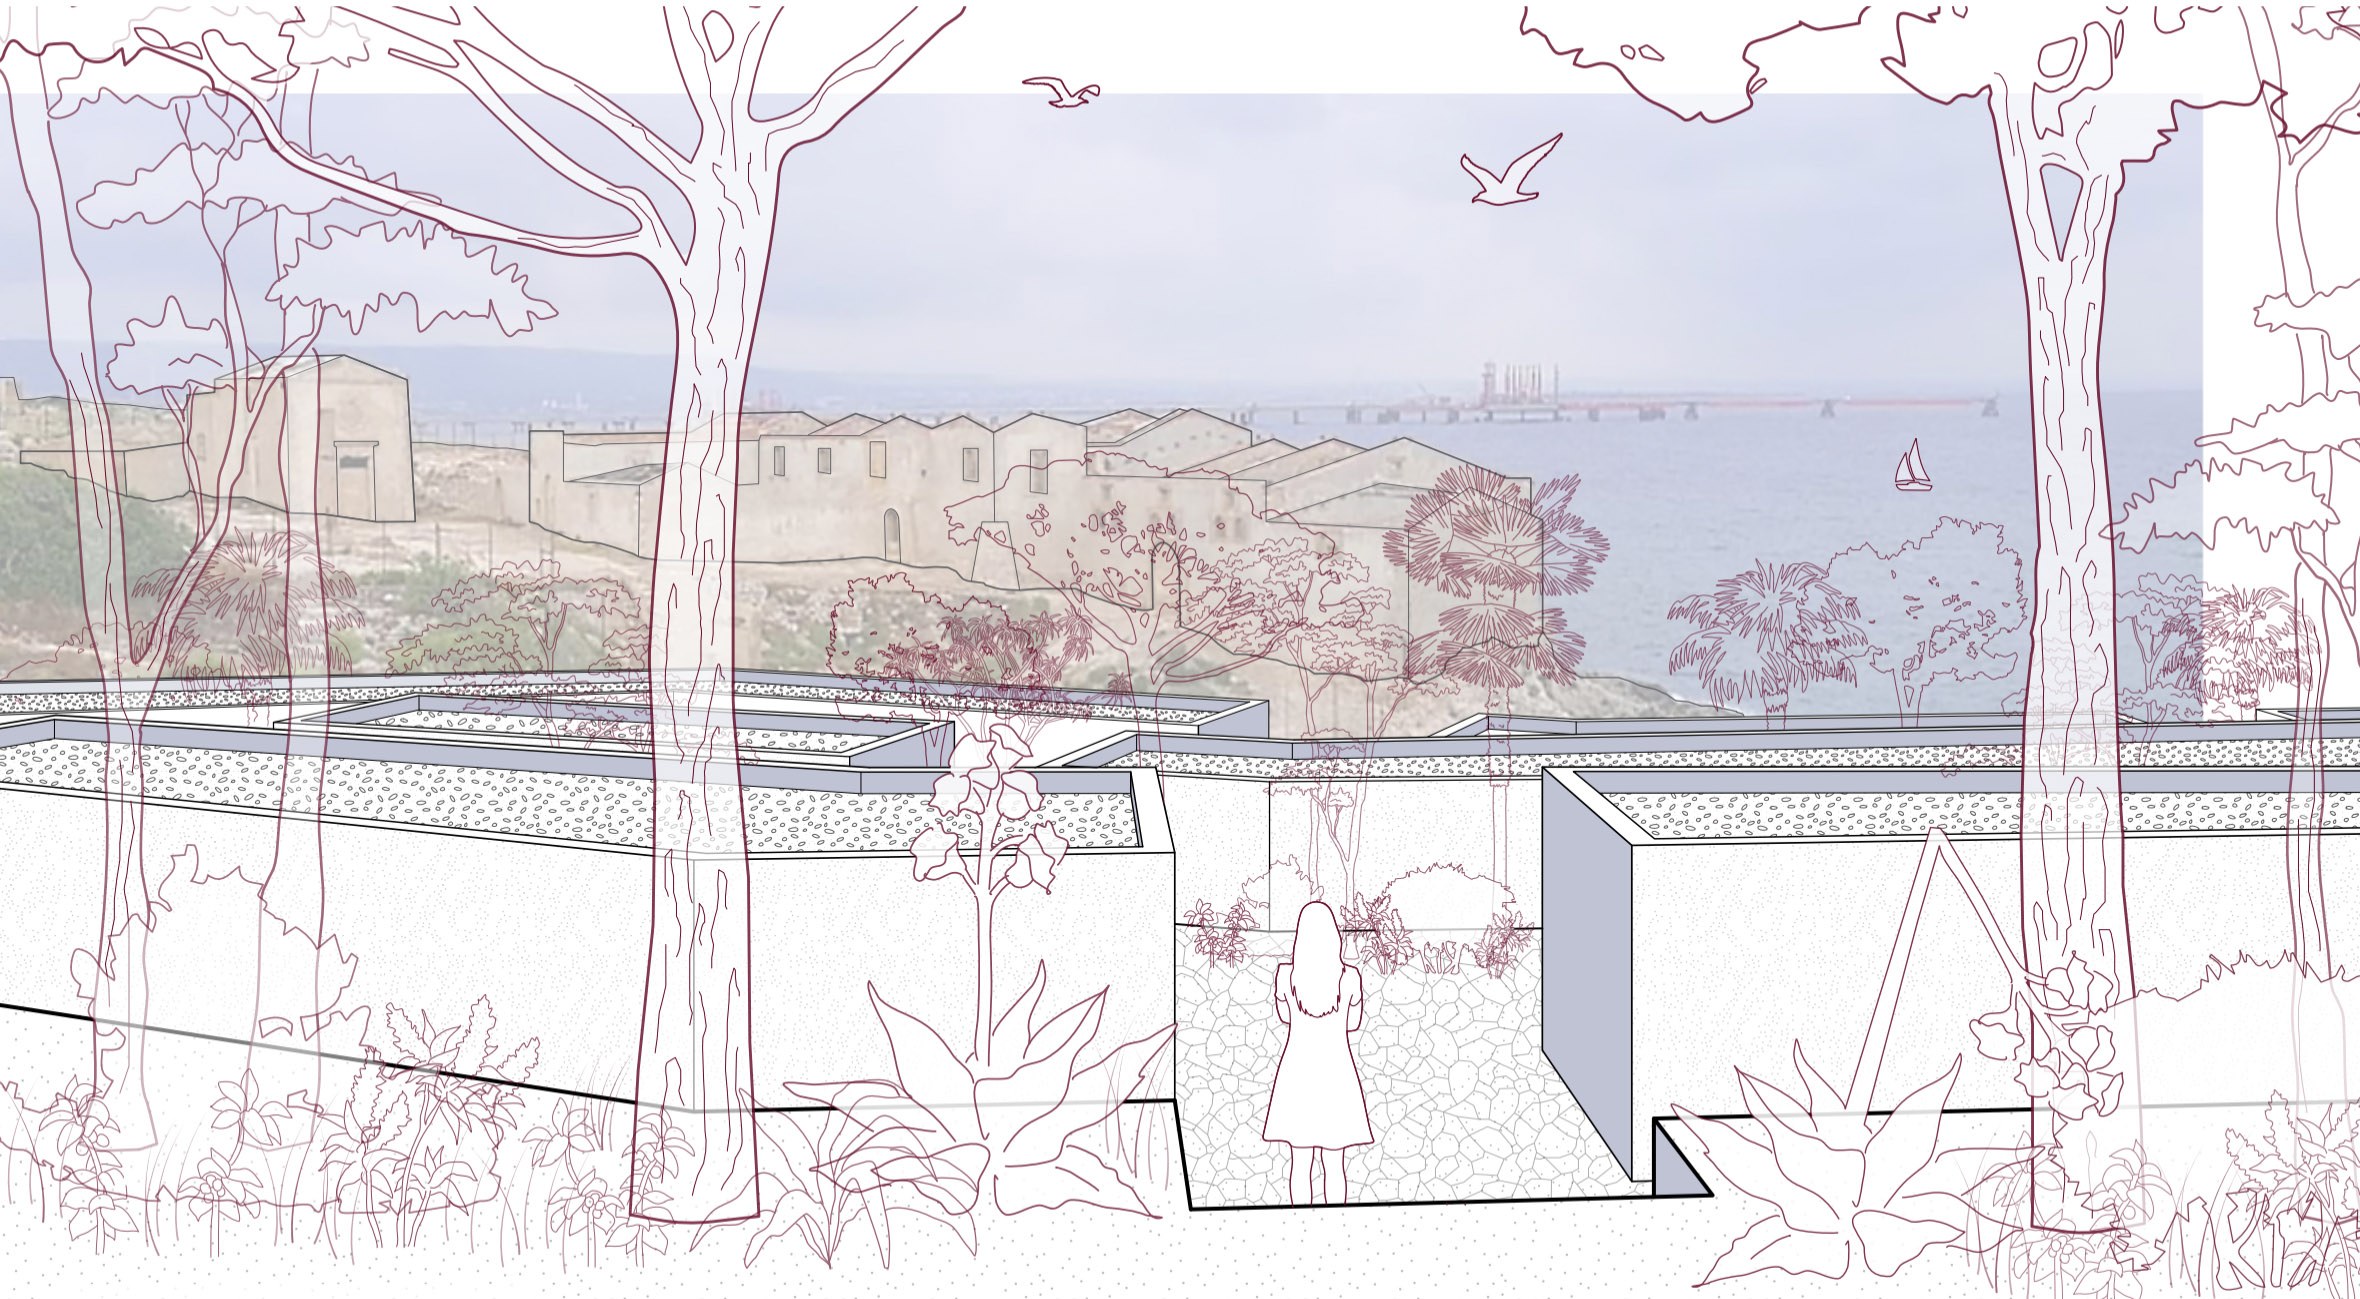 Giuliana Vaccarino Gearty’s Thesis: perspective of “lodges” looking towards tonnara